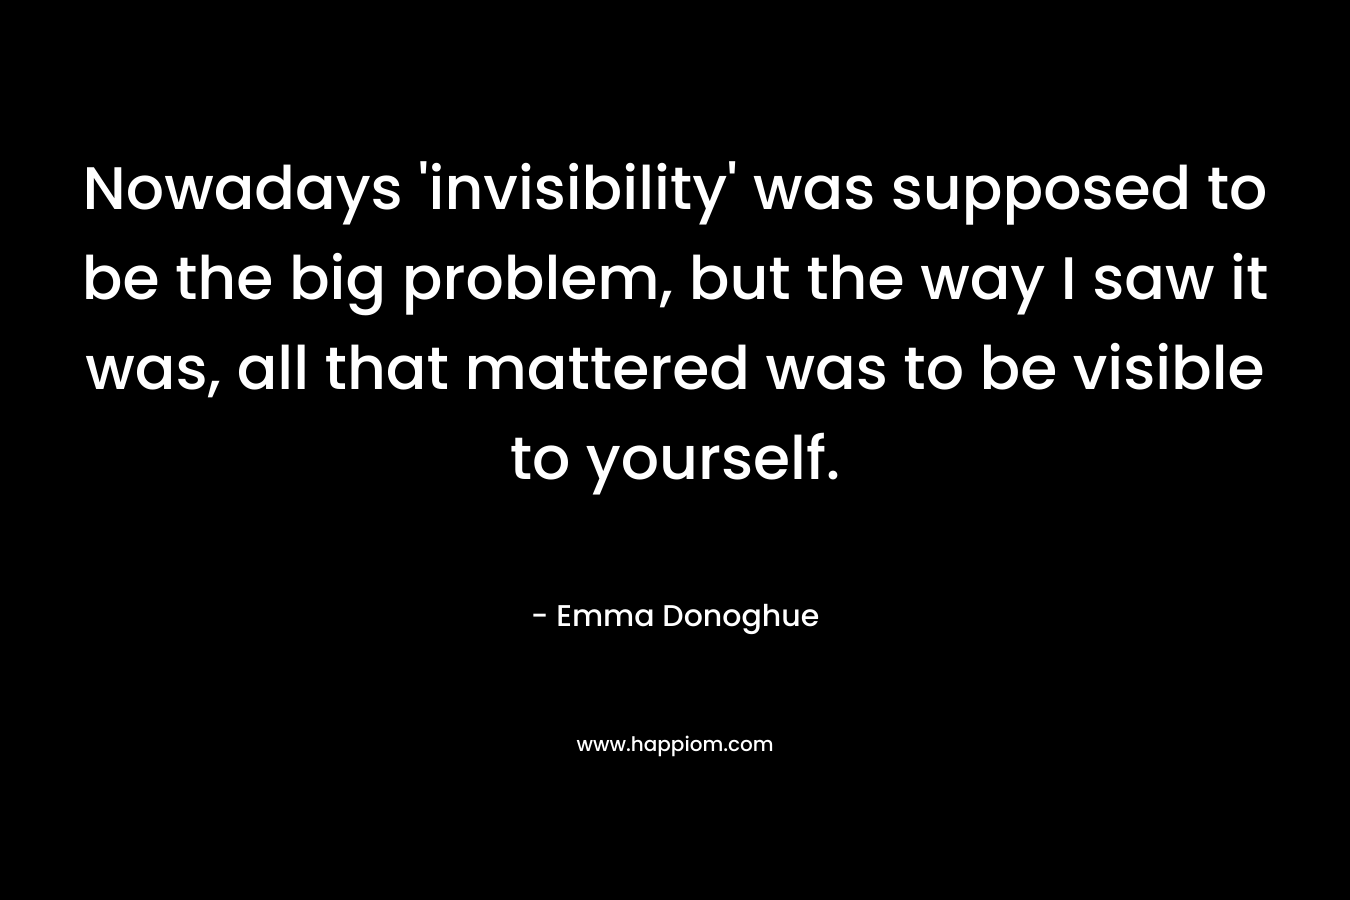 Nowadays ‘invisibility’ was supposed to be the big problem, but the way I saw it was, all that mattered was to be visible to yourself. – Emma Donoghue